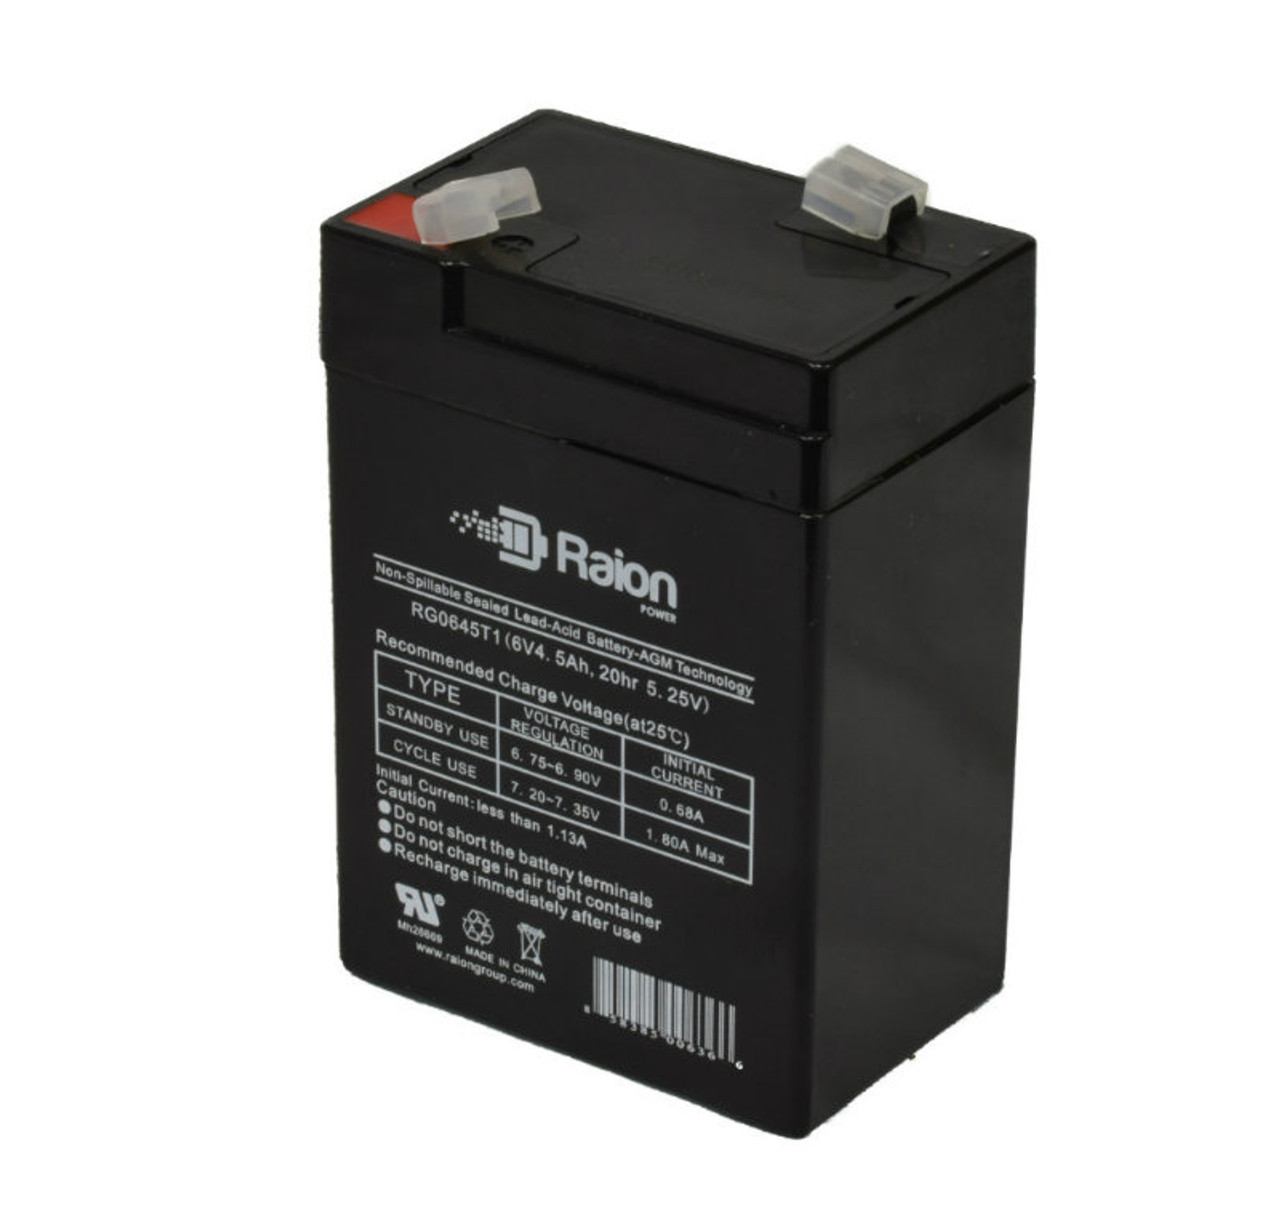 Raion Power RG0645T1 6V 4.5Ah Replacement Battery Cartridge for BB BC4.5-6